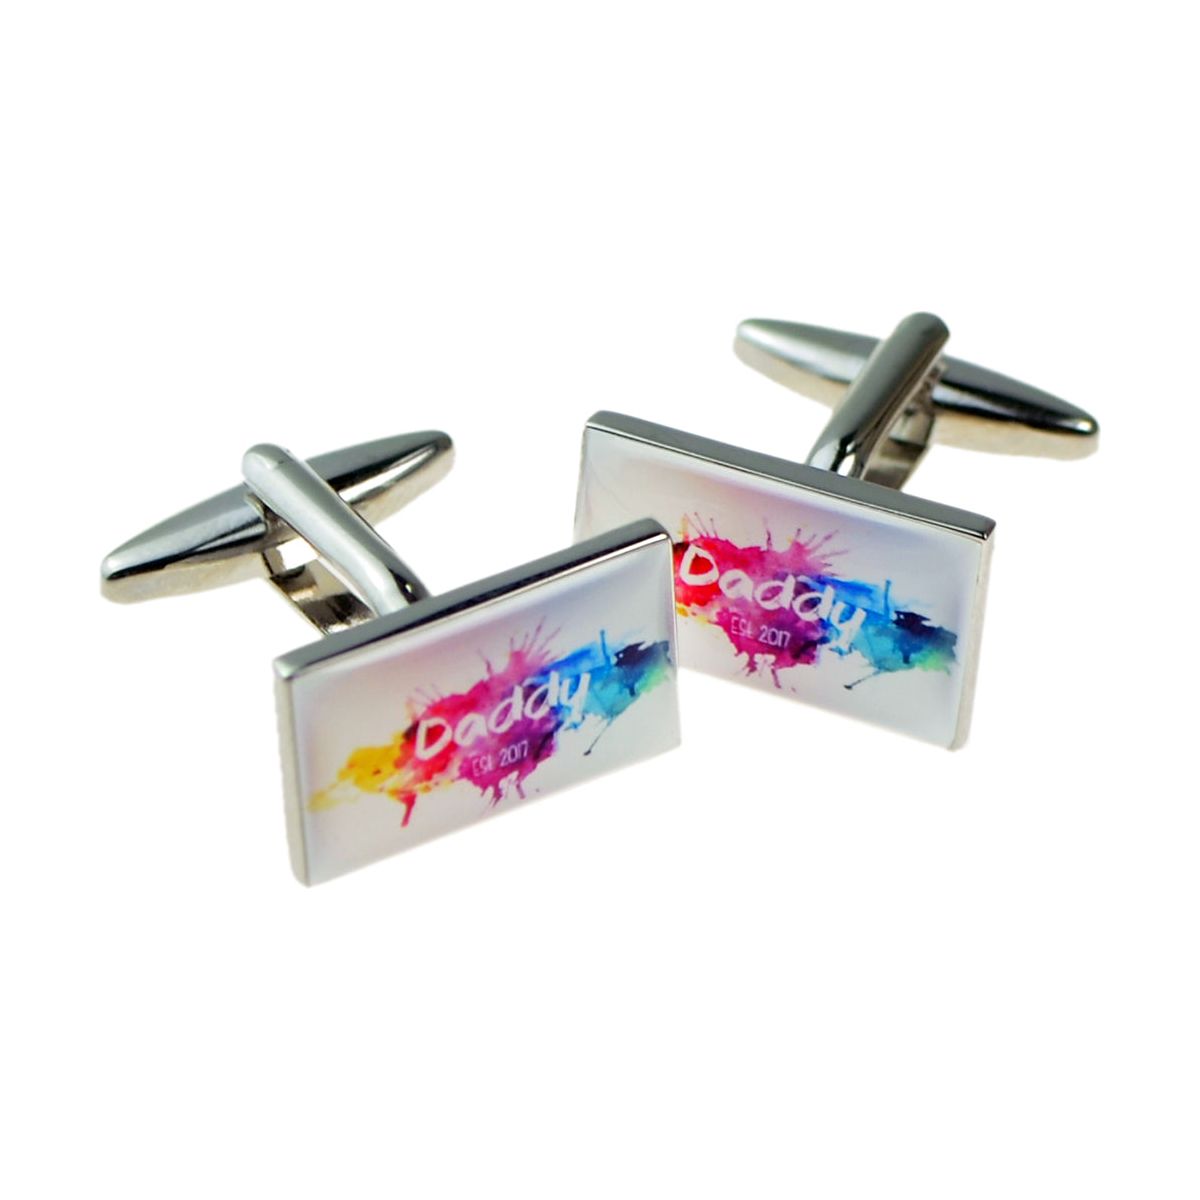 Daddy Established Personalised Colour Splat Cufflinks - Ashton and Finch